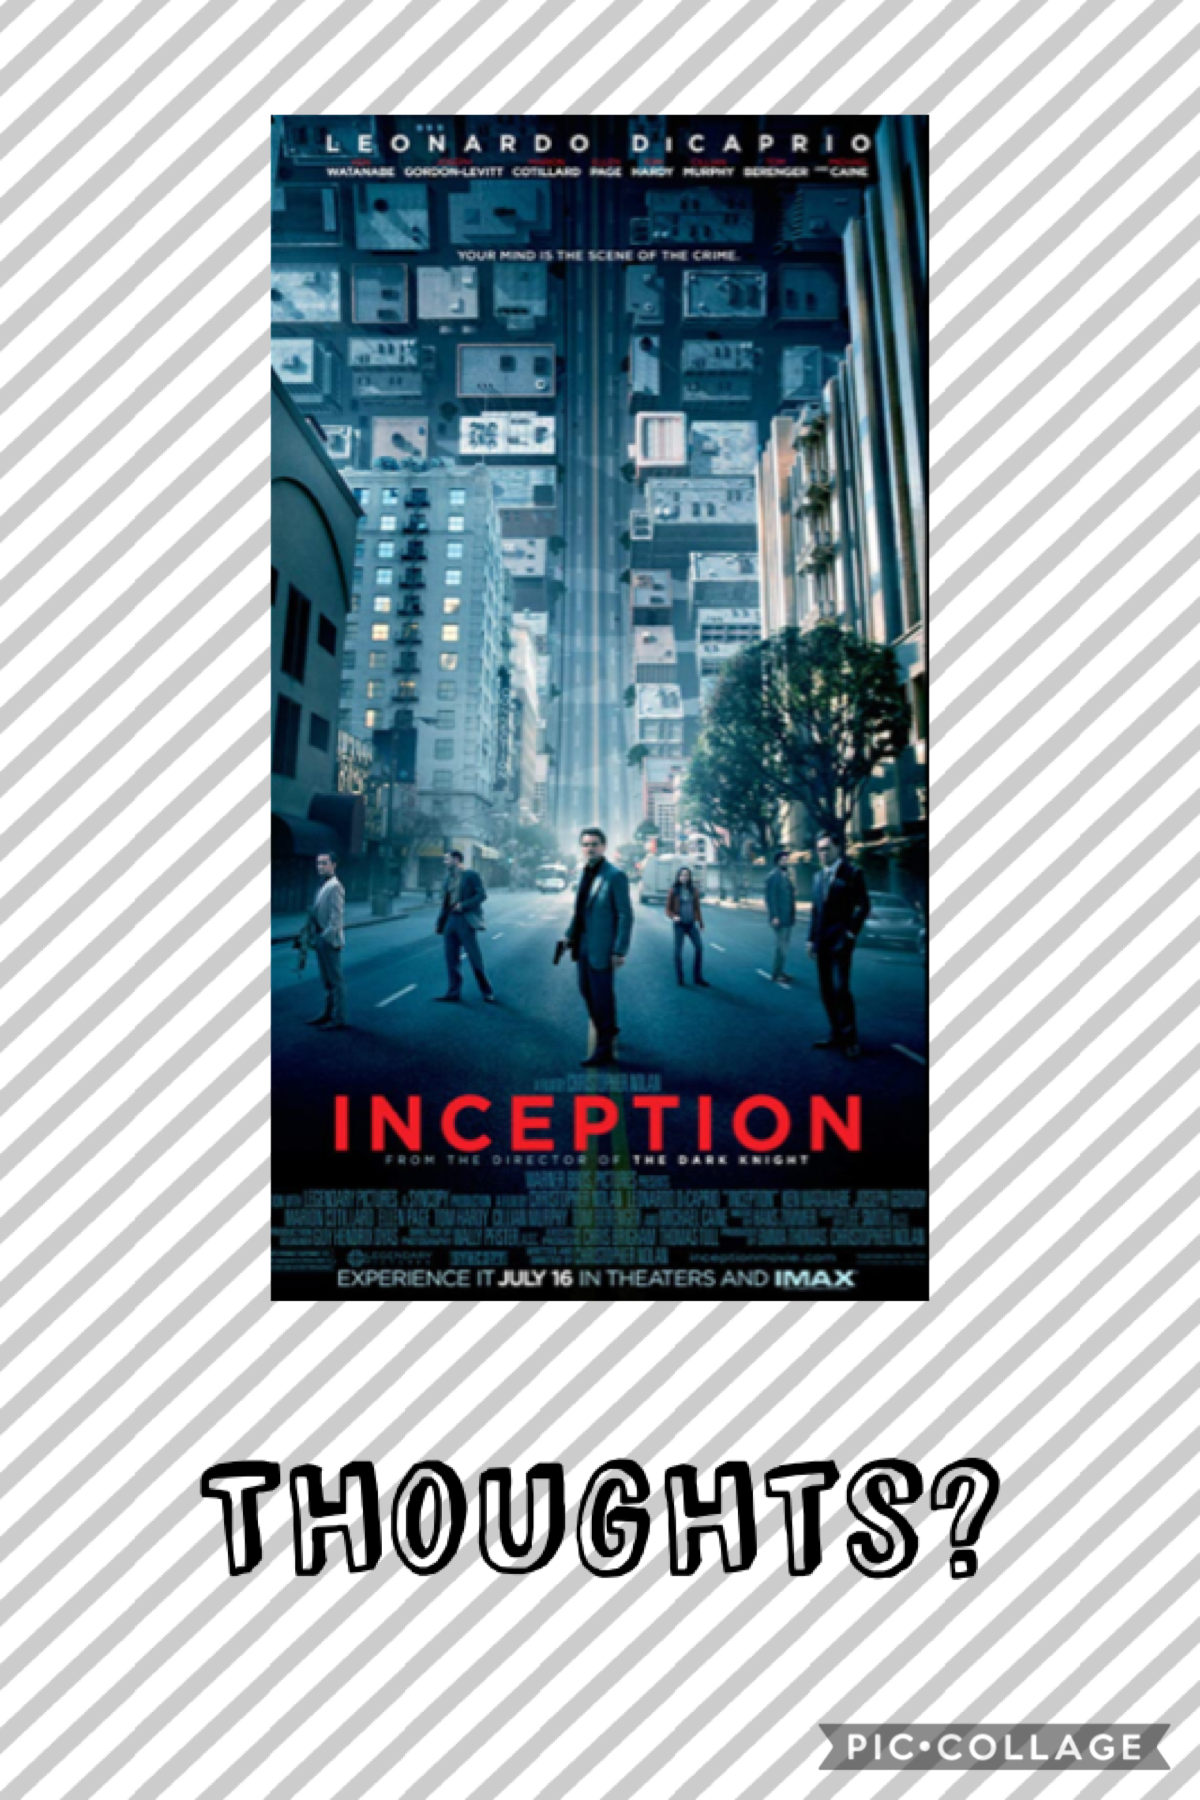 Thoughts on inception? 